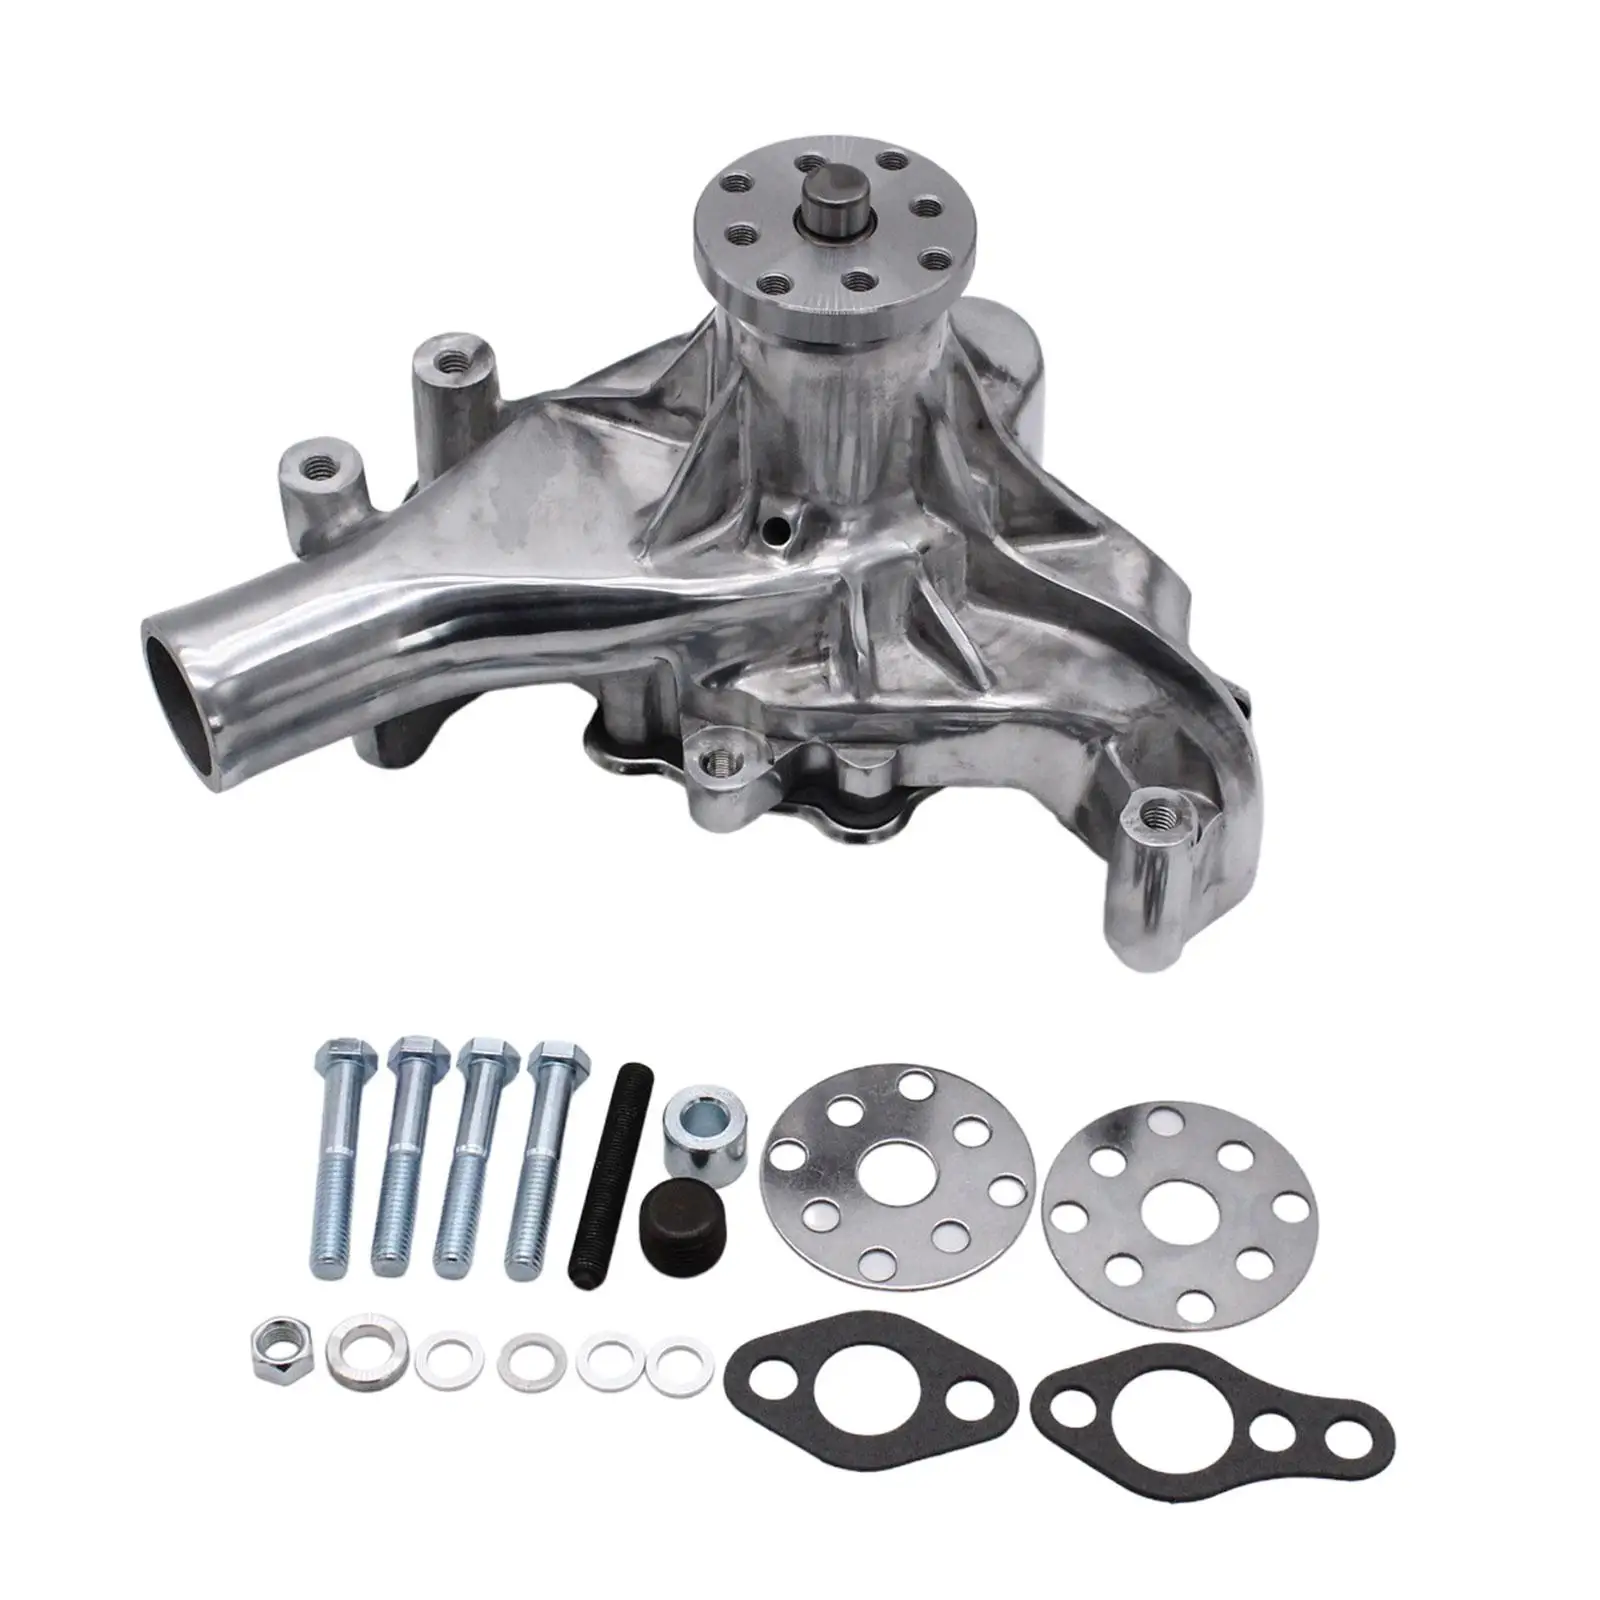 Long Water Pump Direct Replaces Attachment High Performance Easy to Install Automobile Accessory for Chevy 283 327 350 383